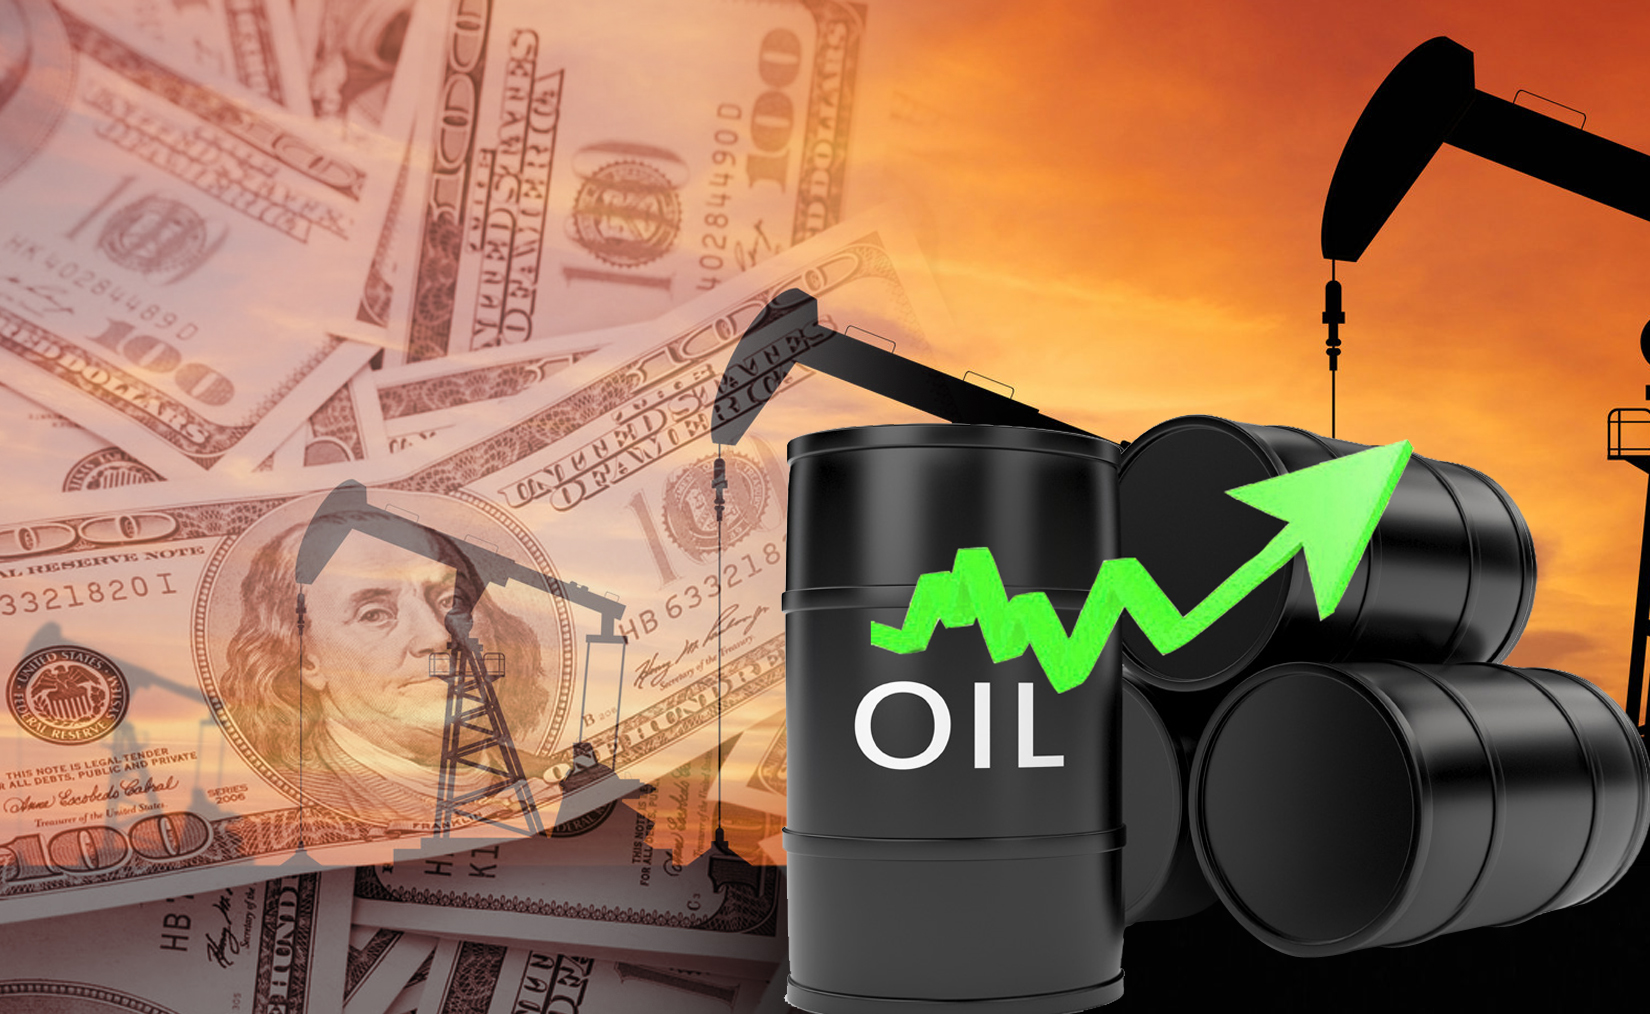 Kuwait oil price up 74 cents to USD 71.79 pb                                                                                                                                                                                                              